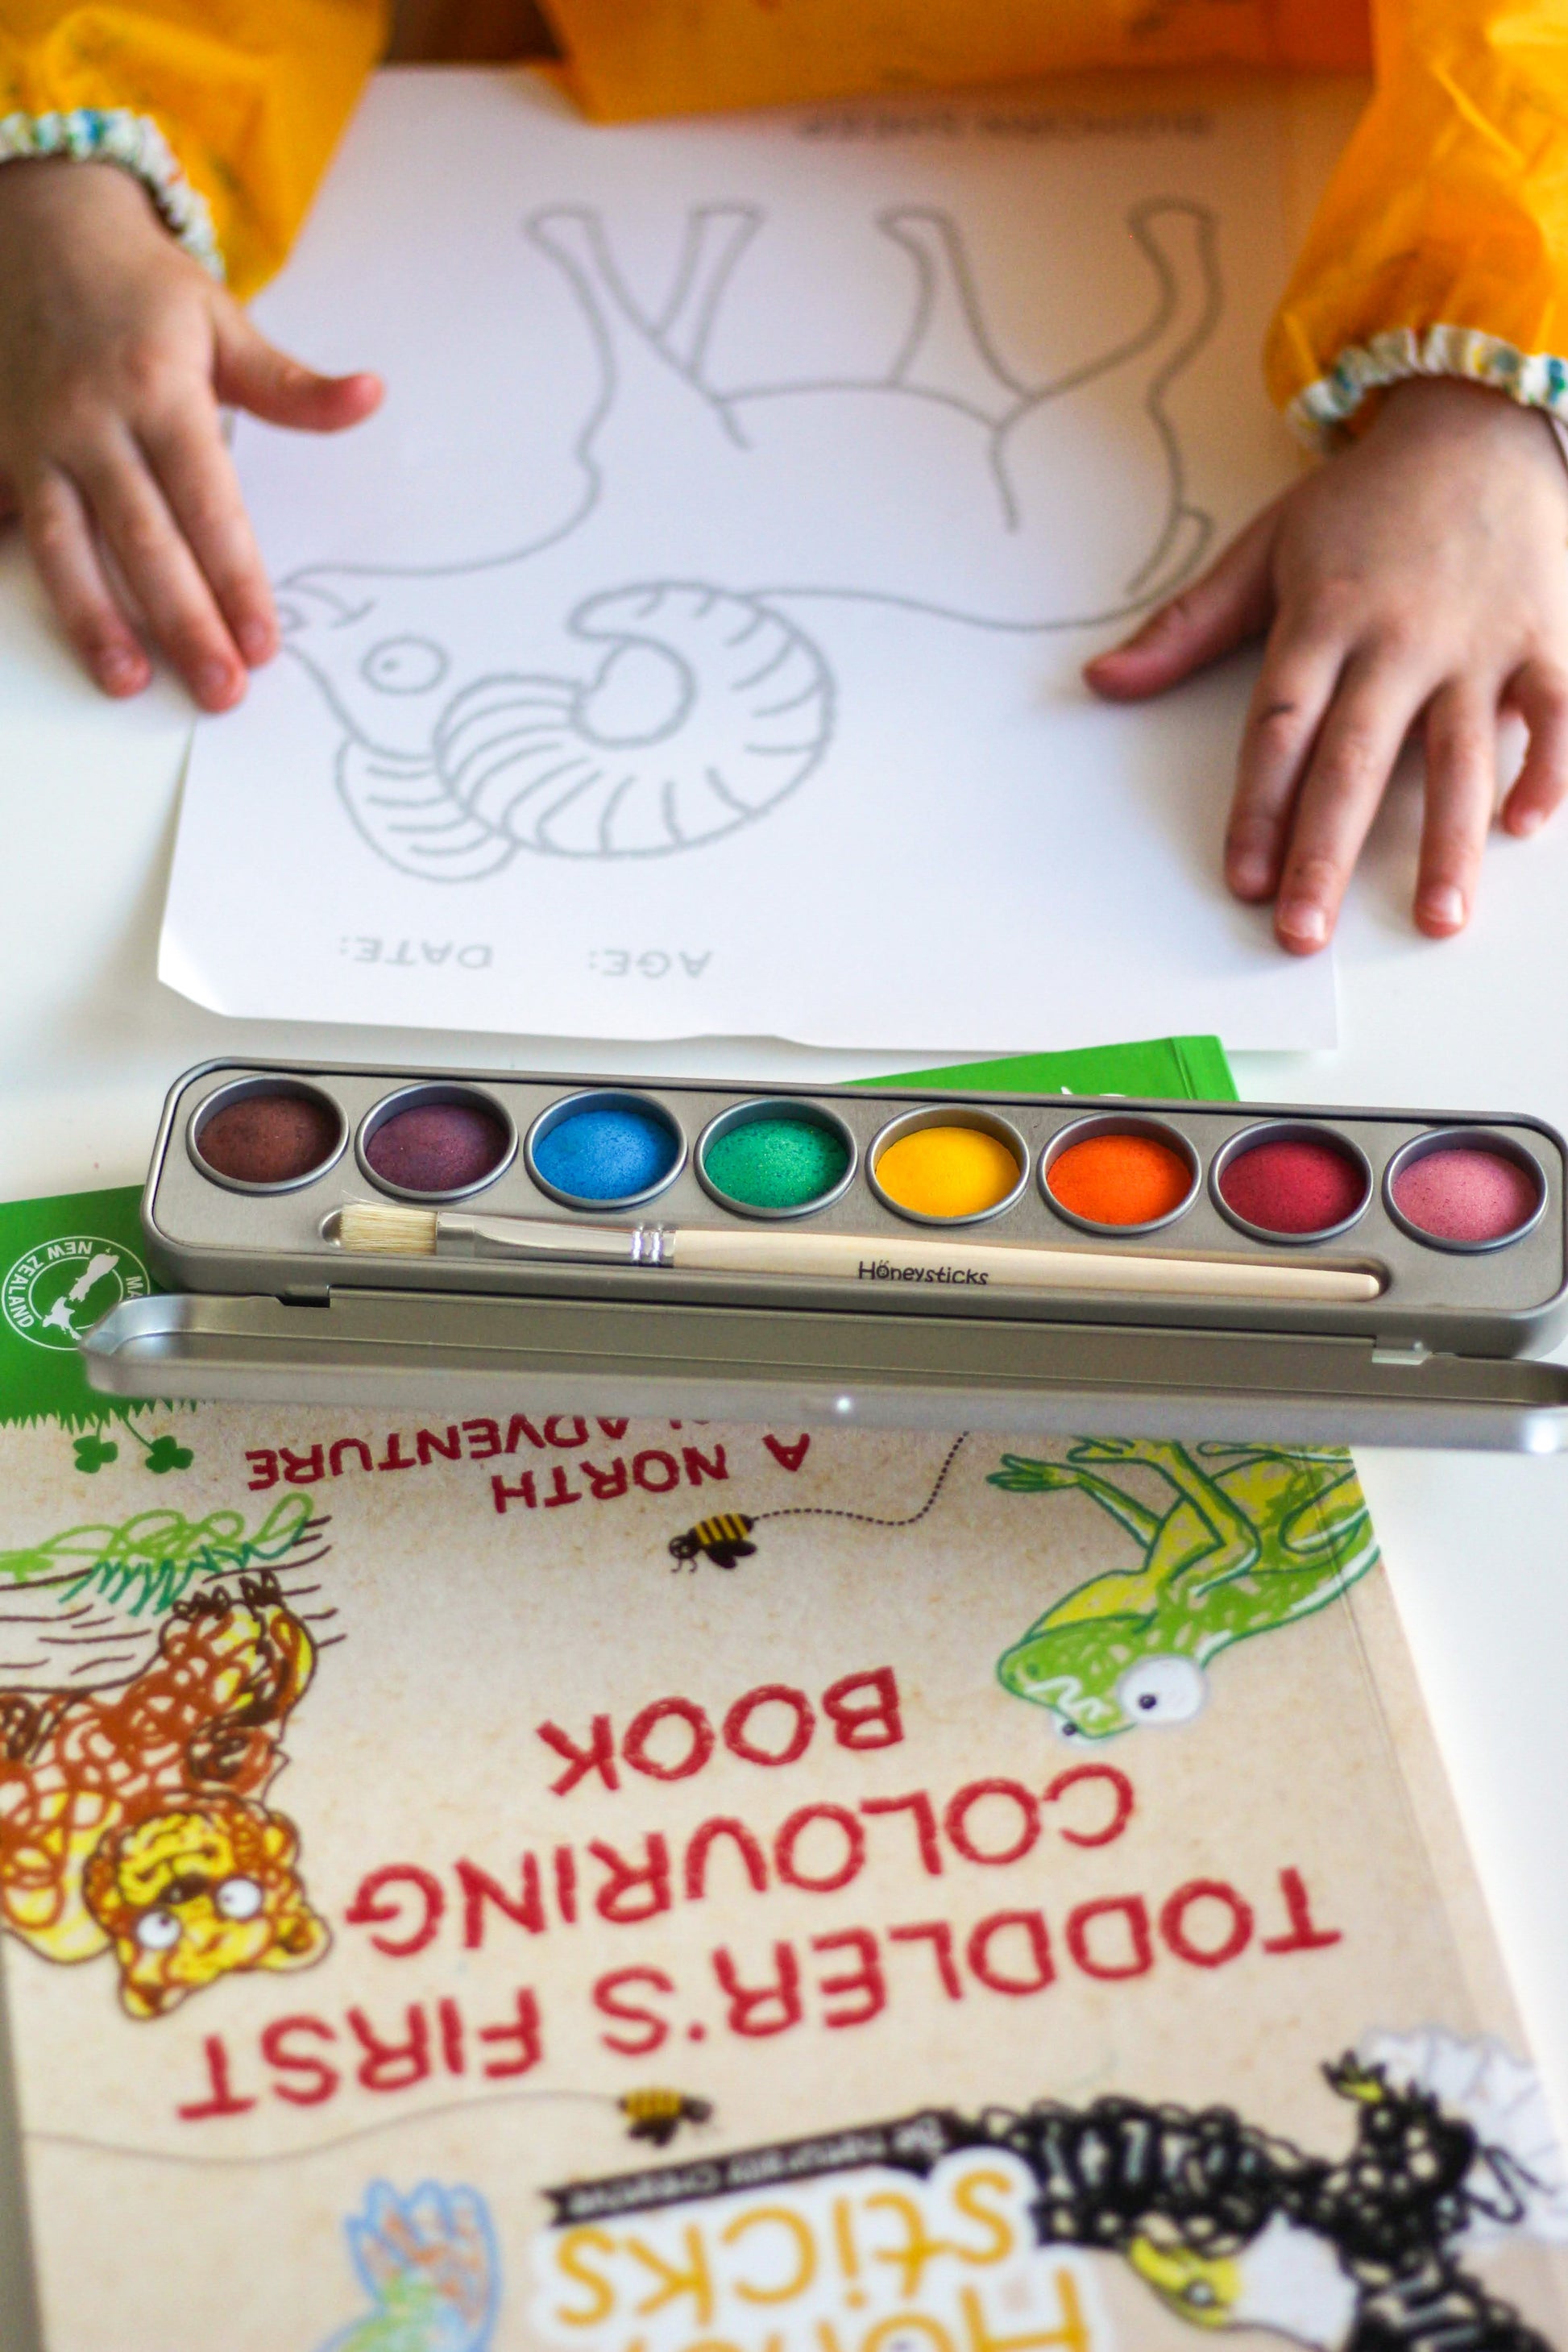 The Busy Bee Coloring Set